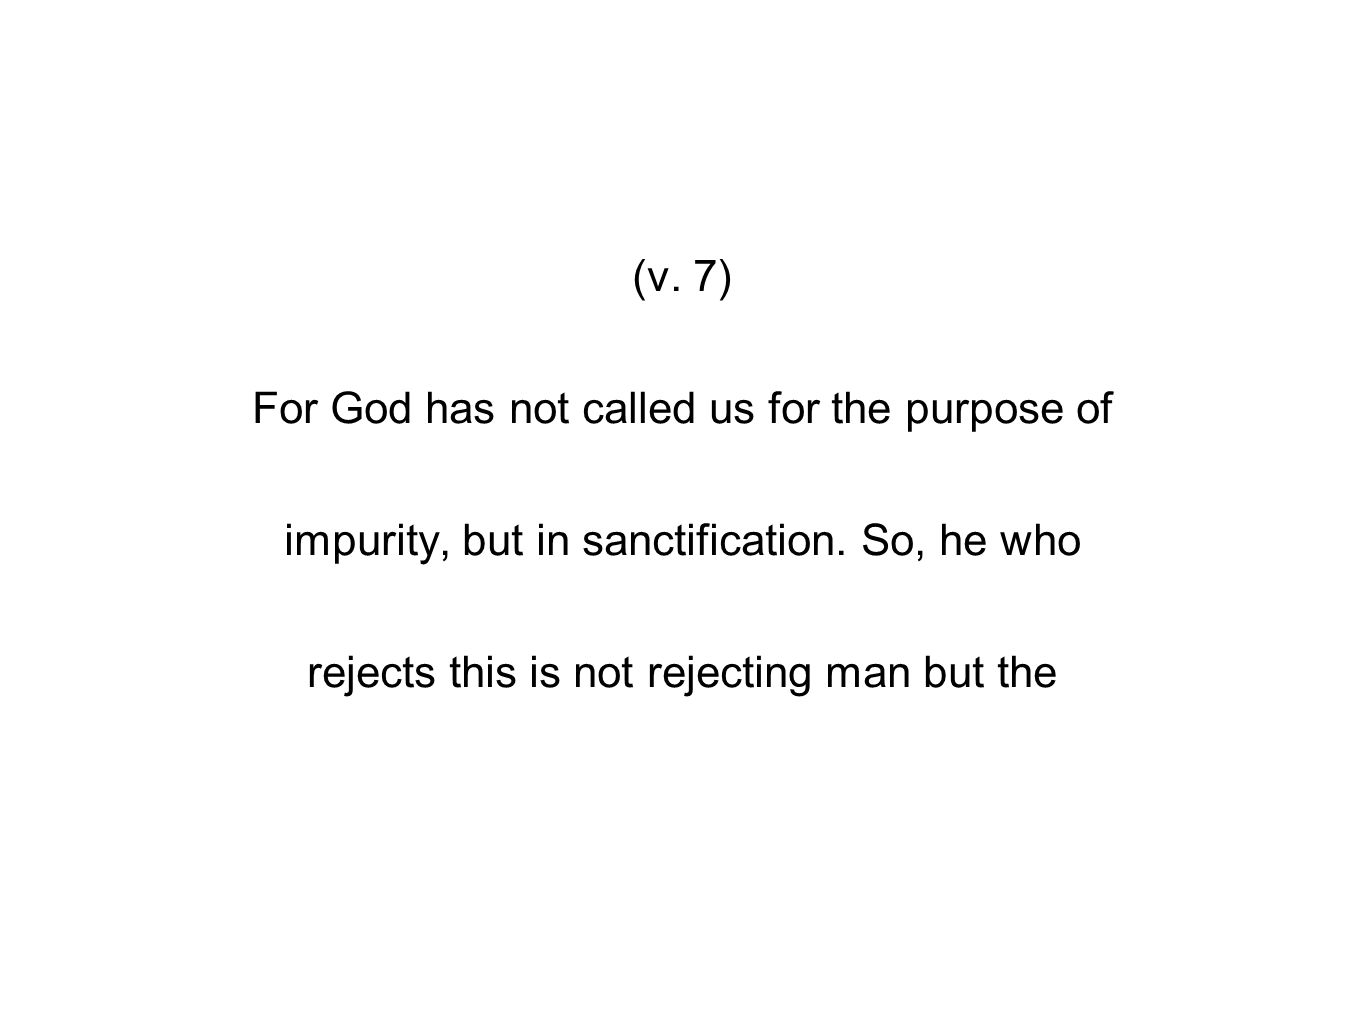 (v. 7) For God has not called us for the purpose of impurity, but in sanctification.